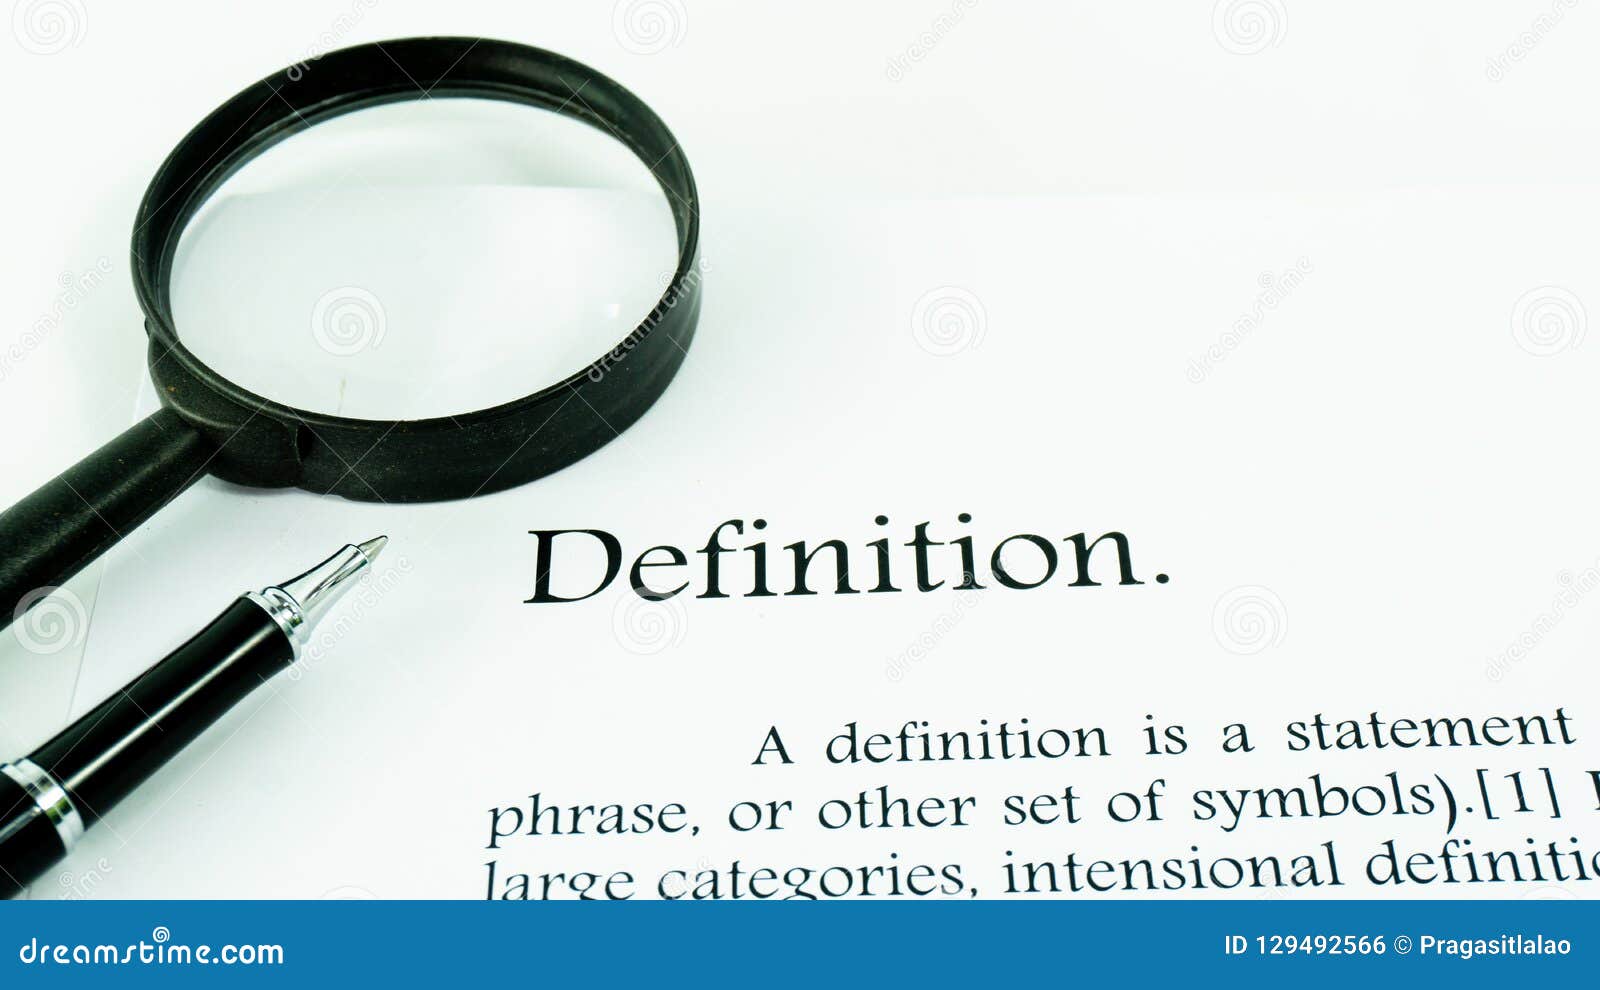 Definition Text Focus Word on White Background Stock Photo - Image of ...